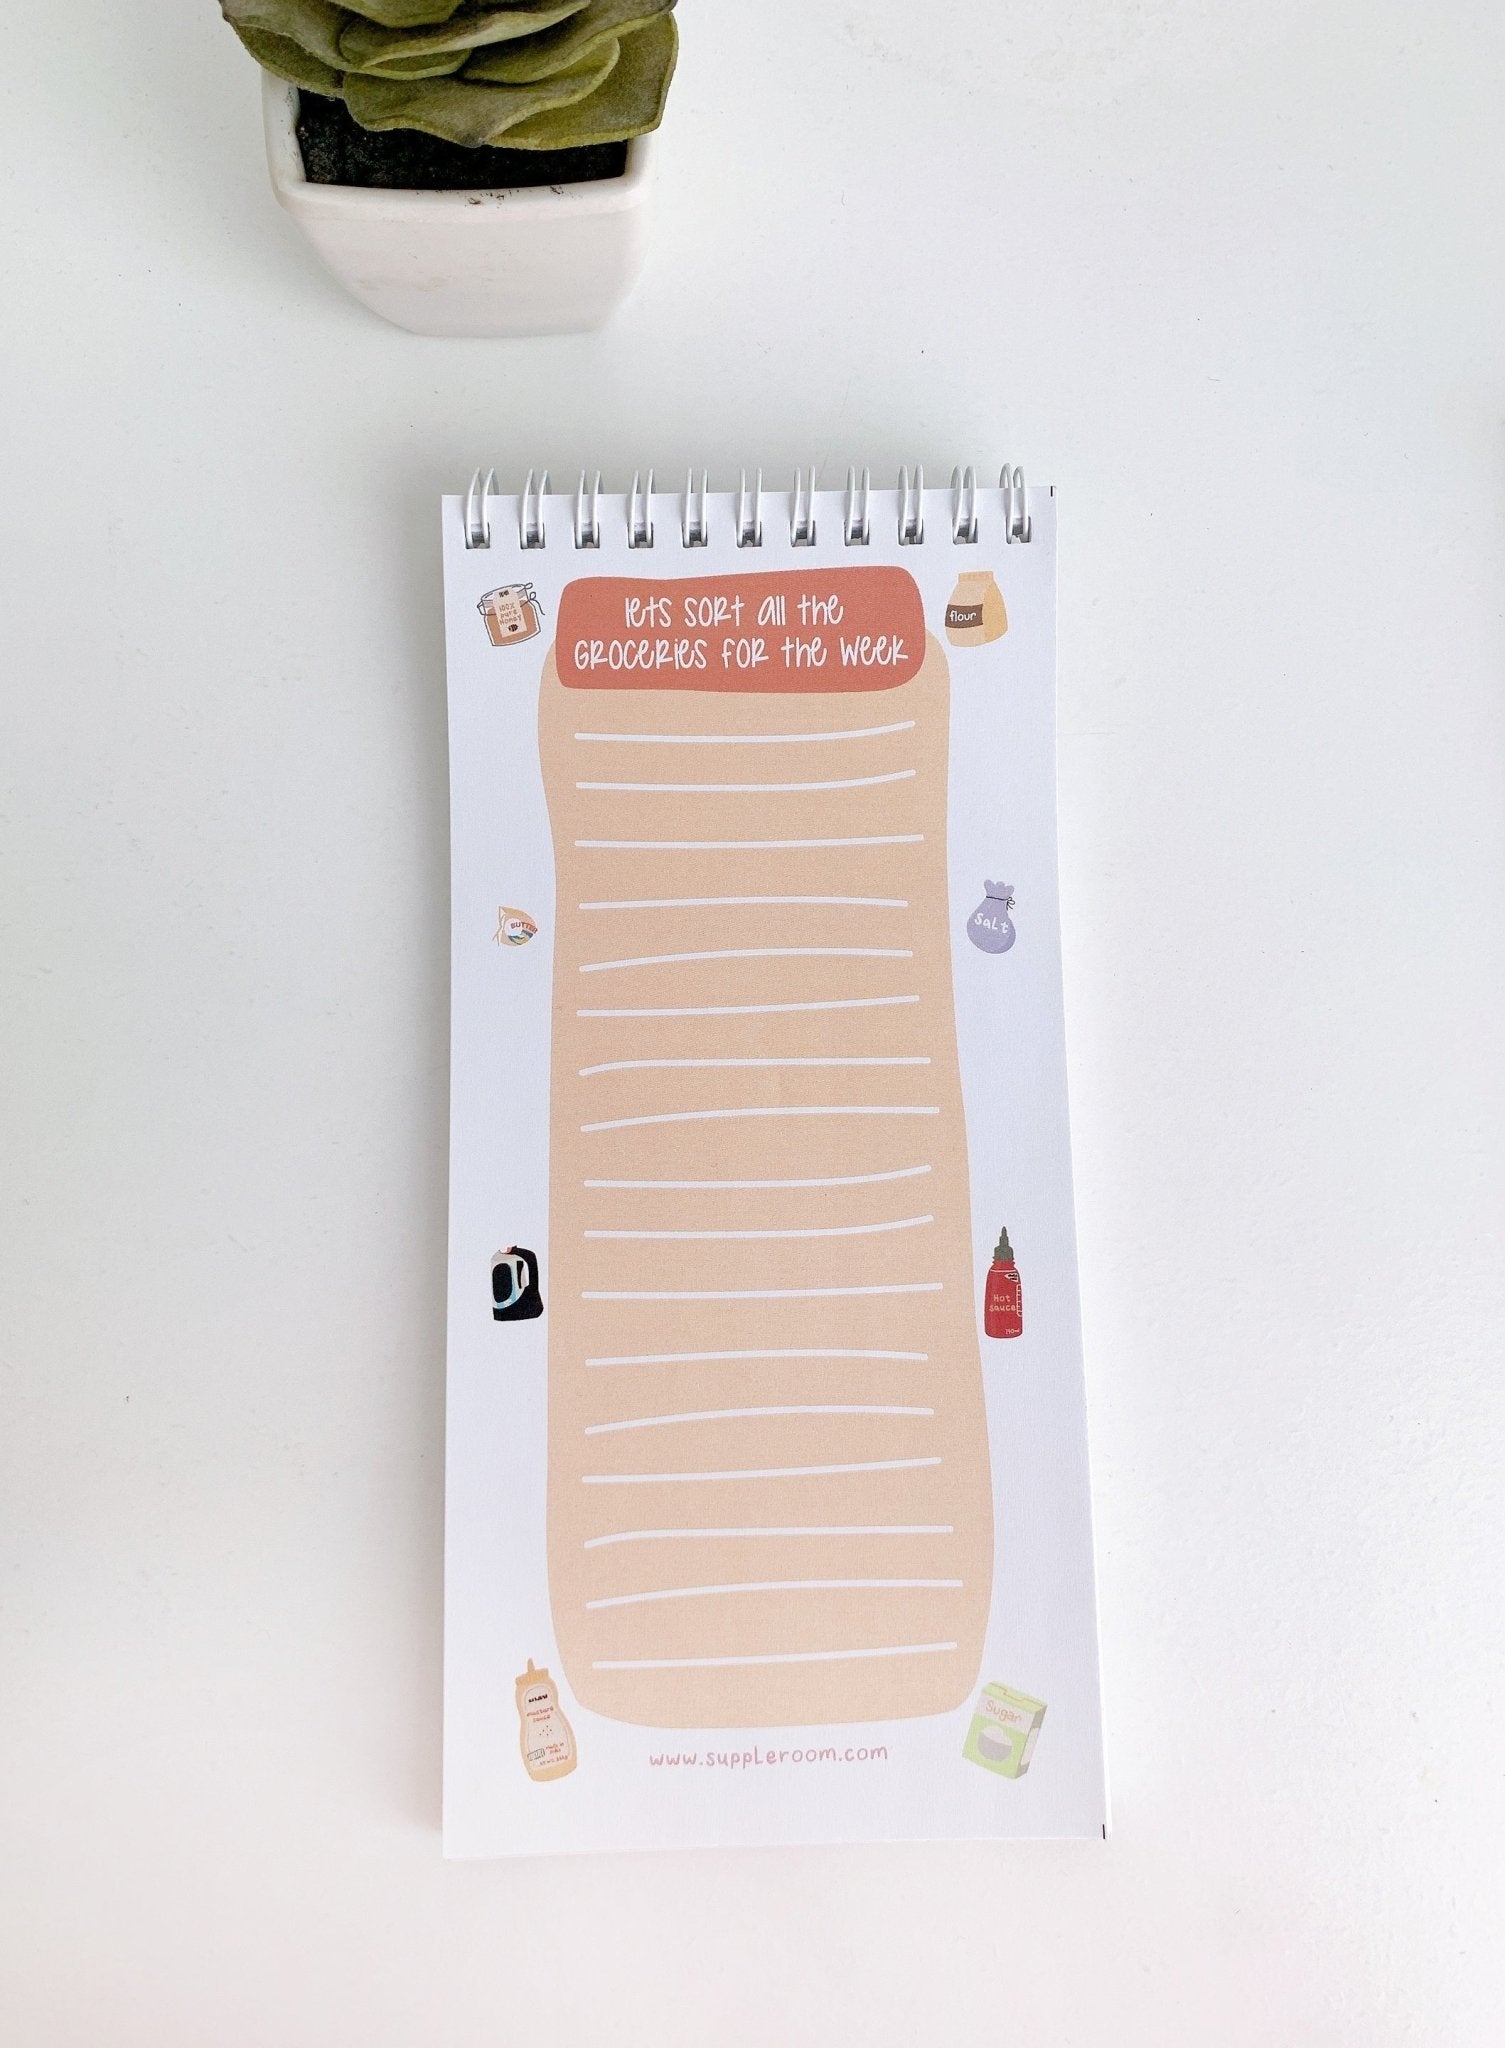 Grocery List Pad | 50 sheets | Spiral bound - Supple Room